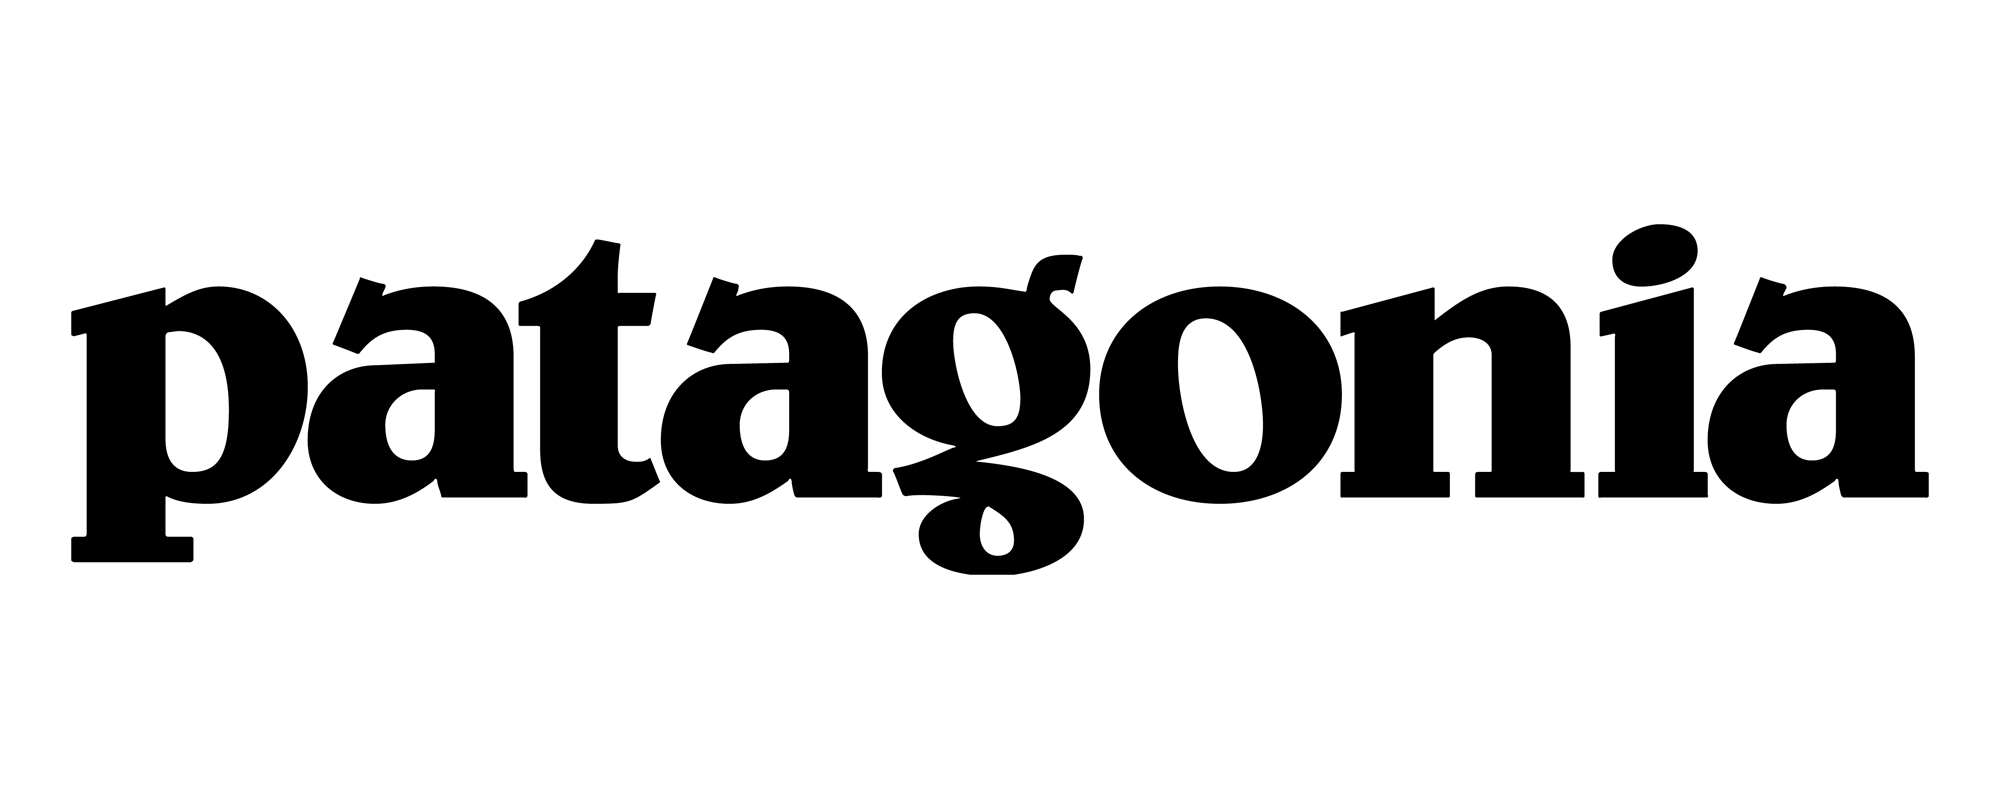 Patagonia Logo - Patagonia Logo, Patagonia Symbol, Meaning, History and Evolution